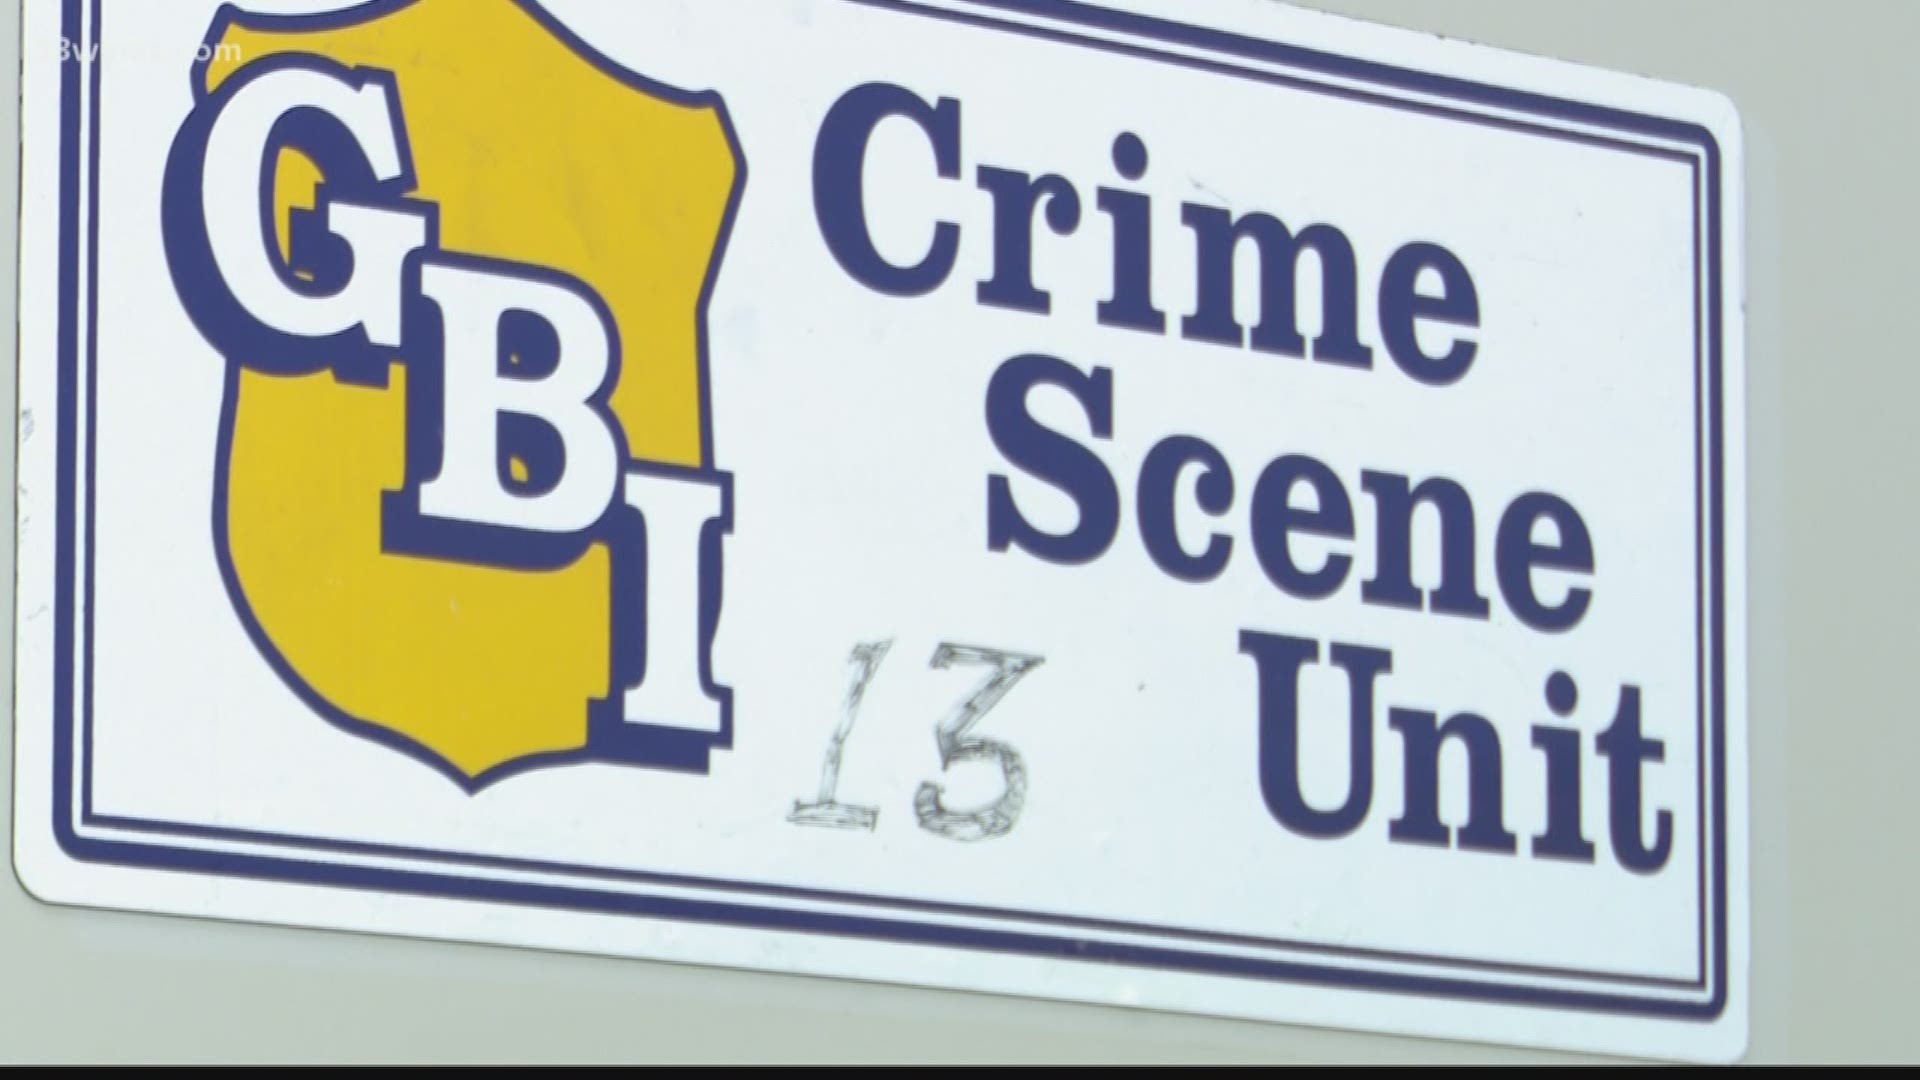 When evidence is collected from a major crime scene in Central Georgia, there's a good chance it will end up at the GBI Region 13 evidence lab.